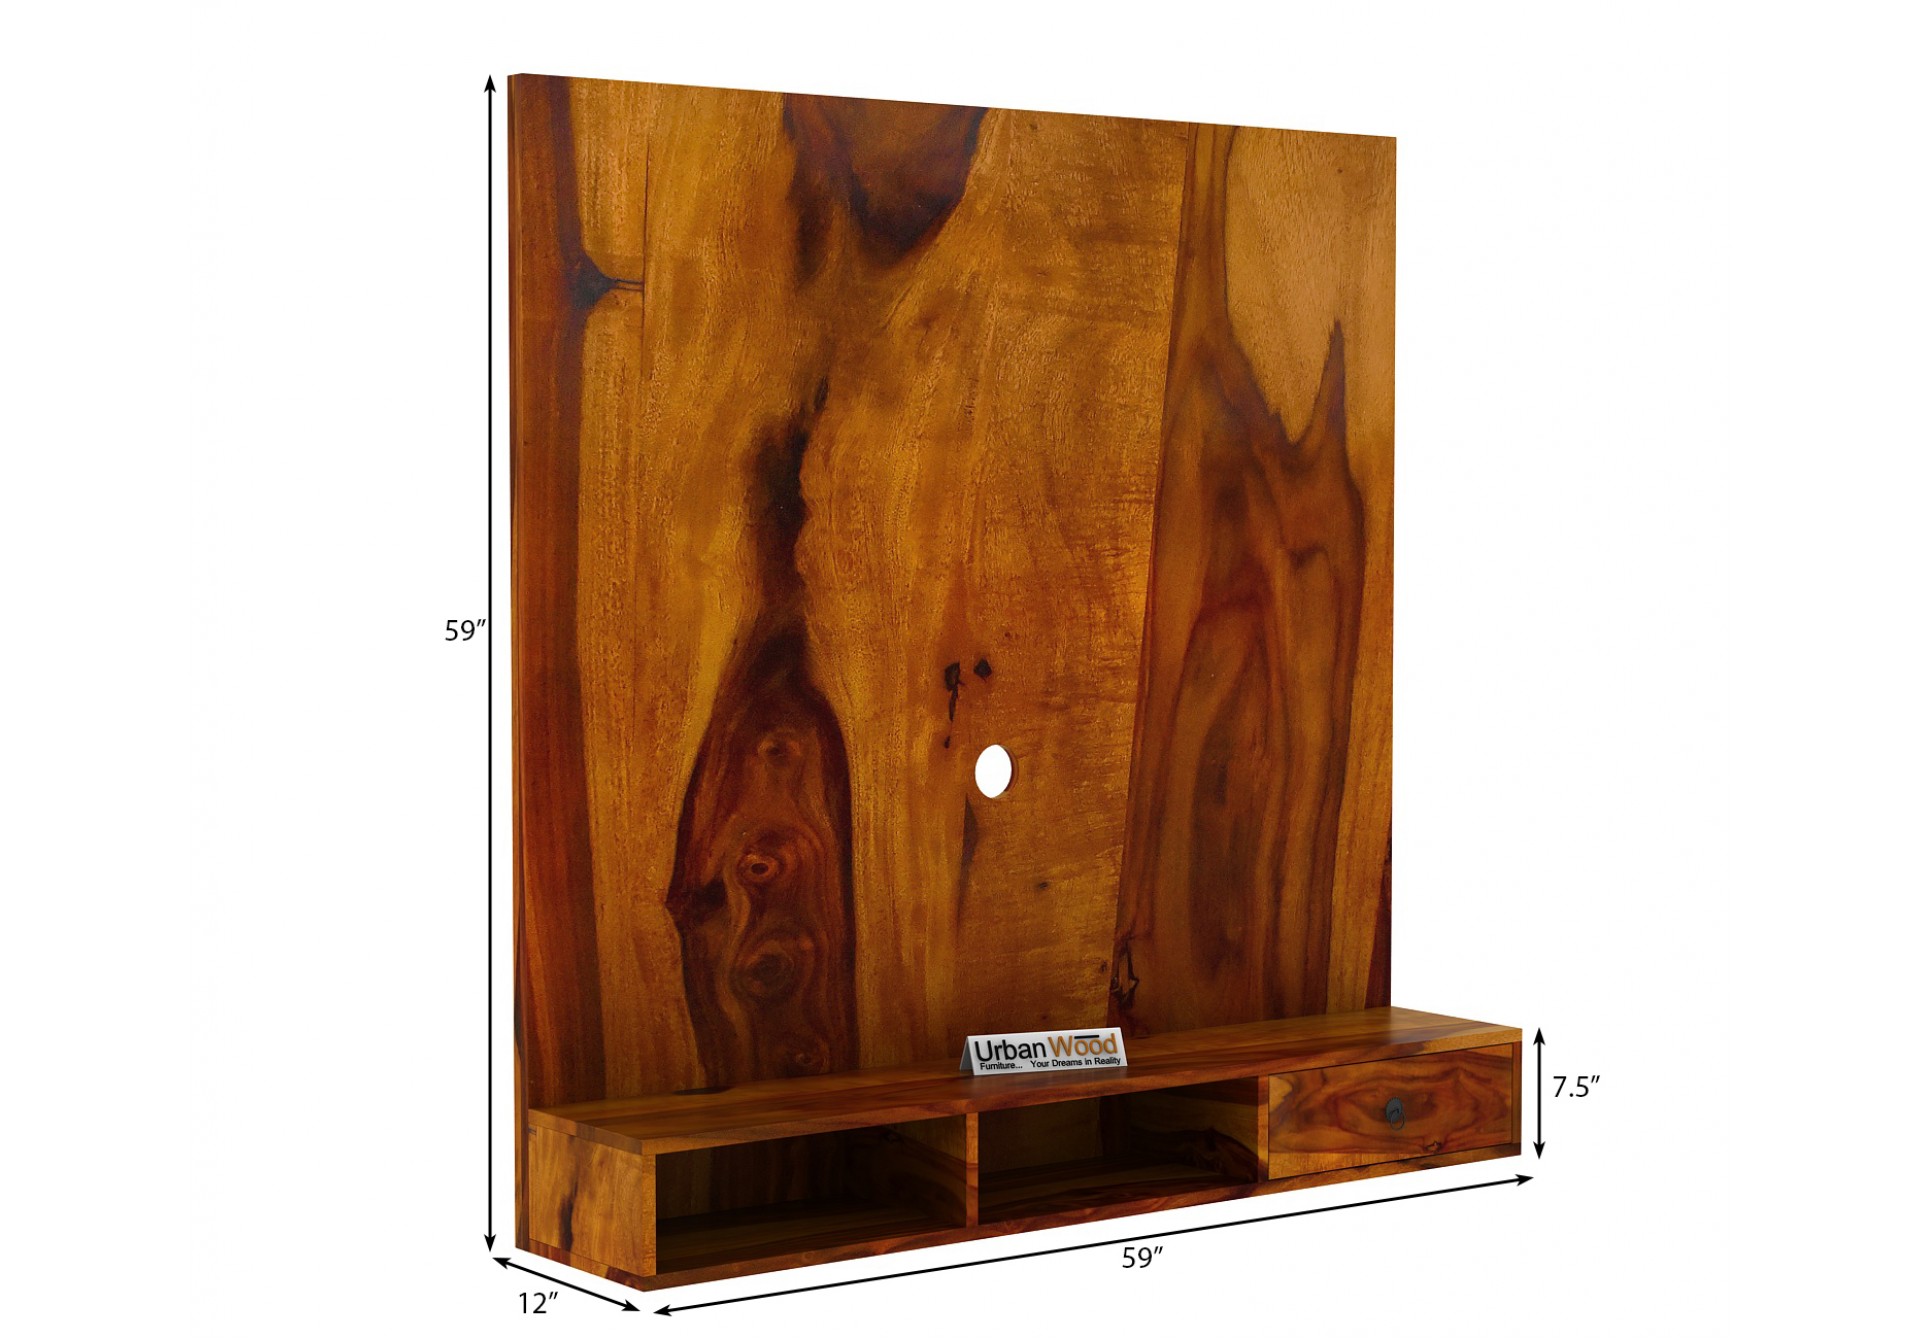 Ource Wooden Wall Mount TV Unit (Honey Finish)